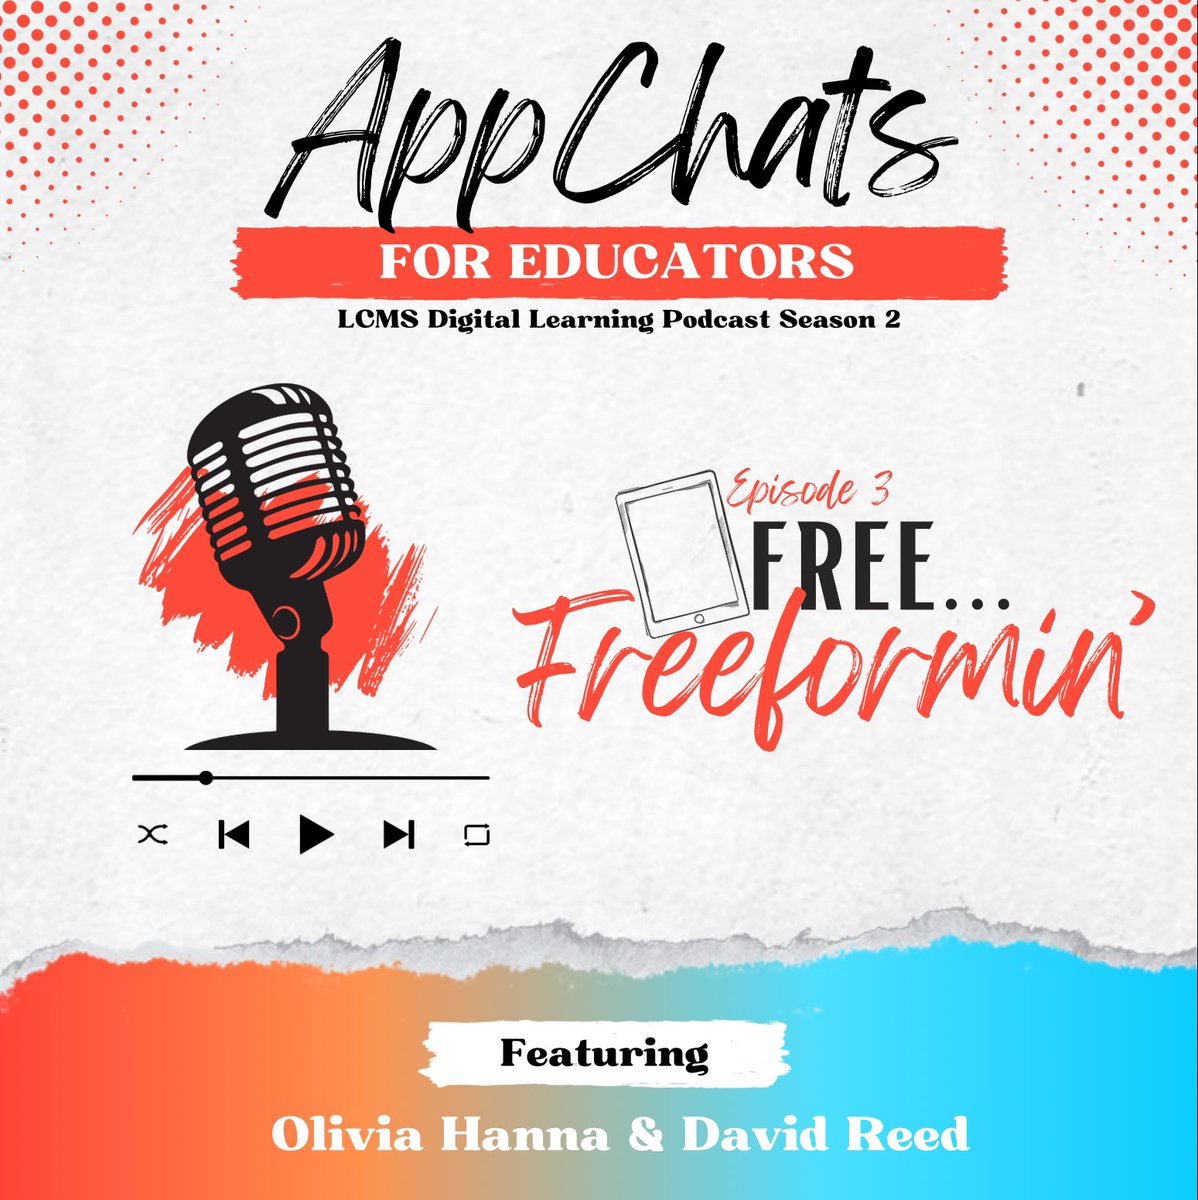 The latest episode of the LCMS Teacher podcast is up, featuring 2 of our teachers as they discuss how they and their students have used #Freeform to learn and create! #appleEDU #appleFreeform #weareLCP

youtu.be/ods_QvoH-34